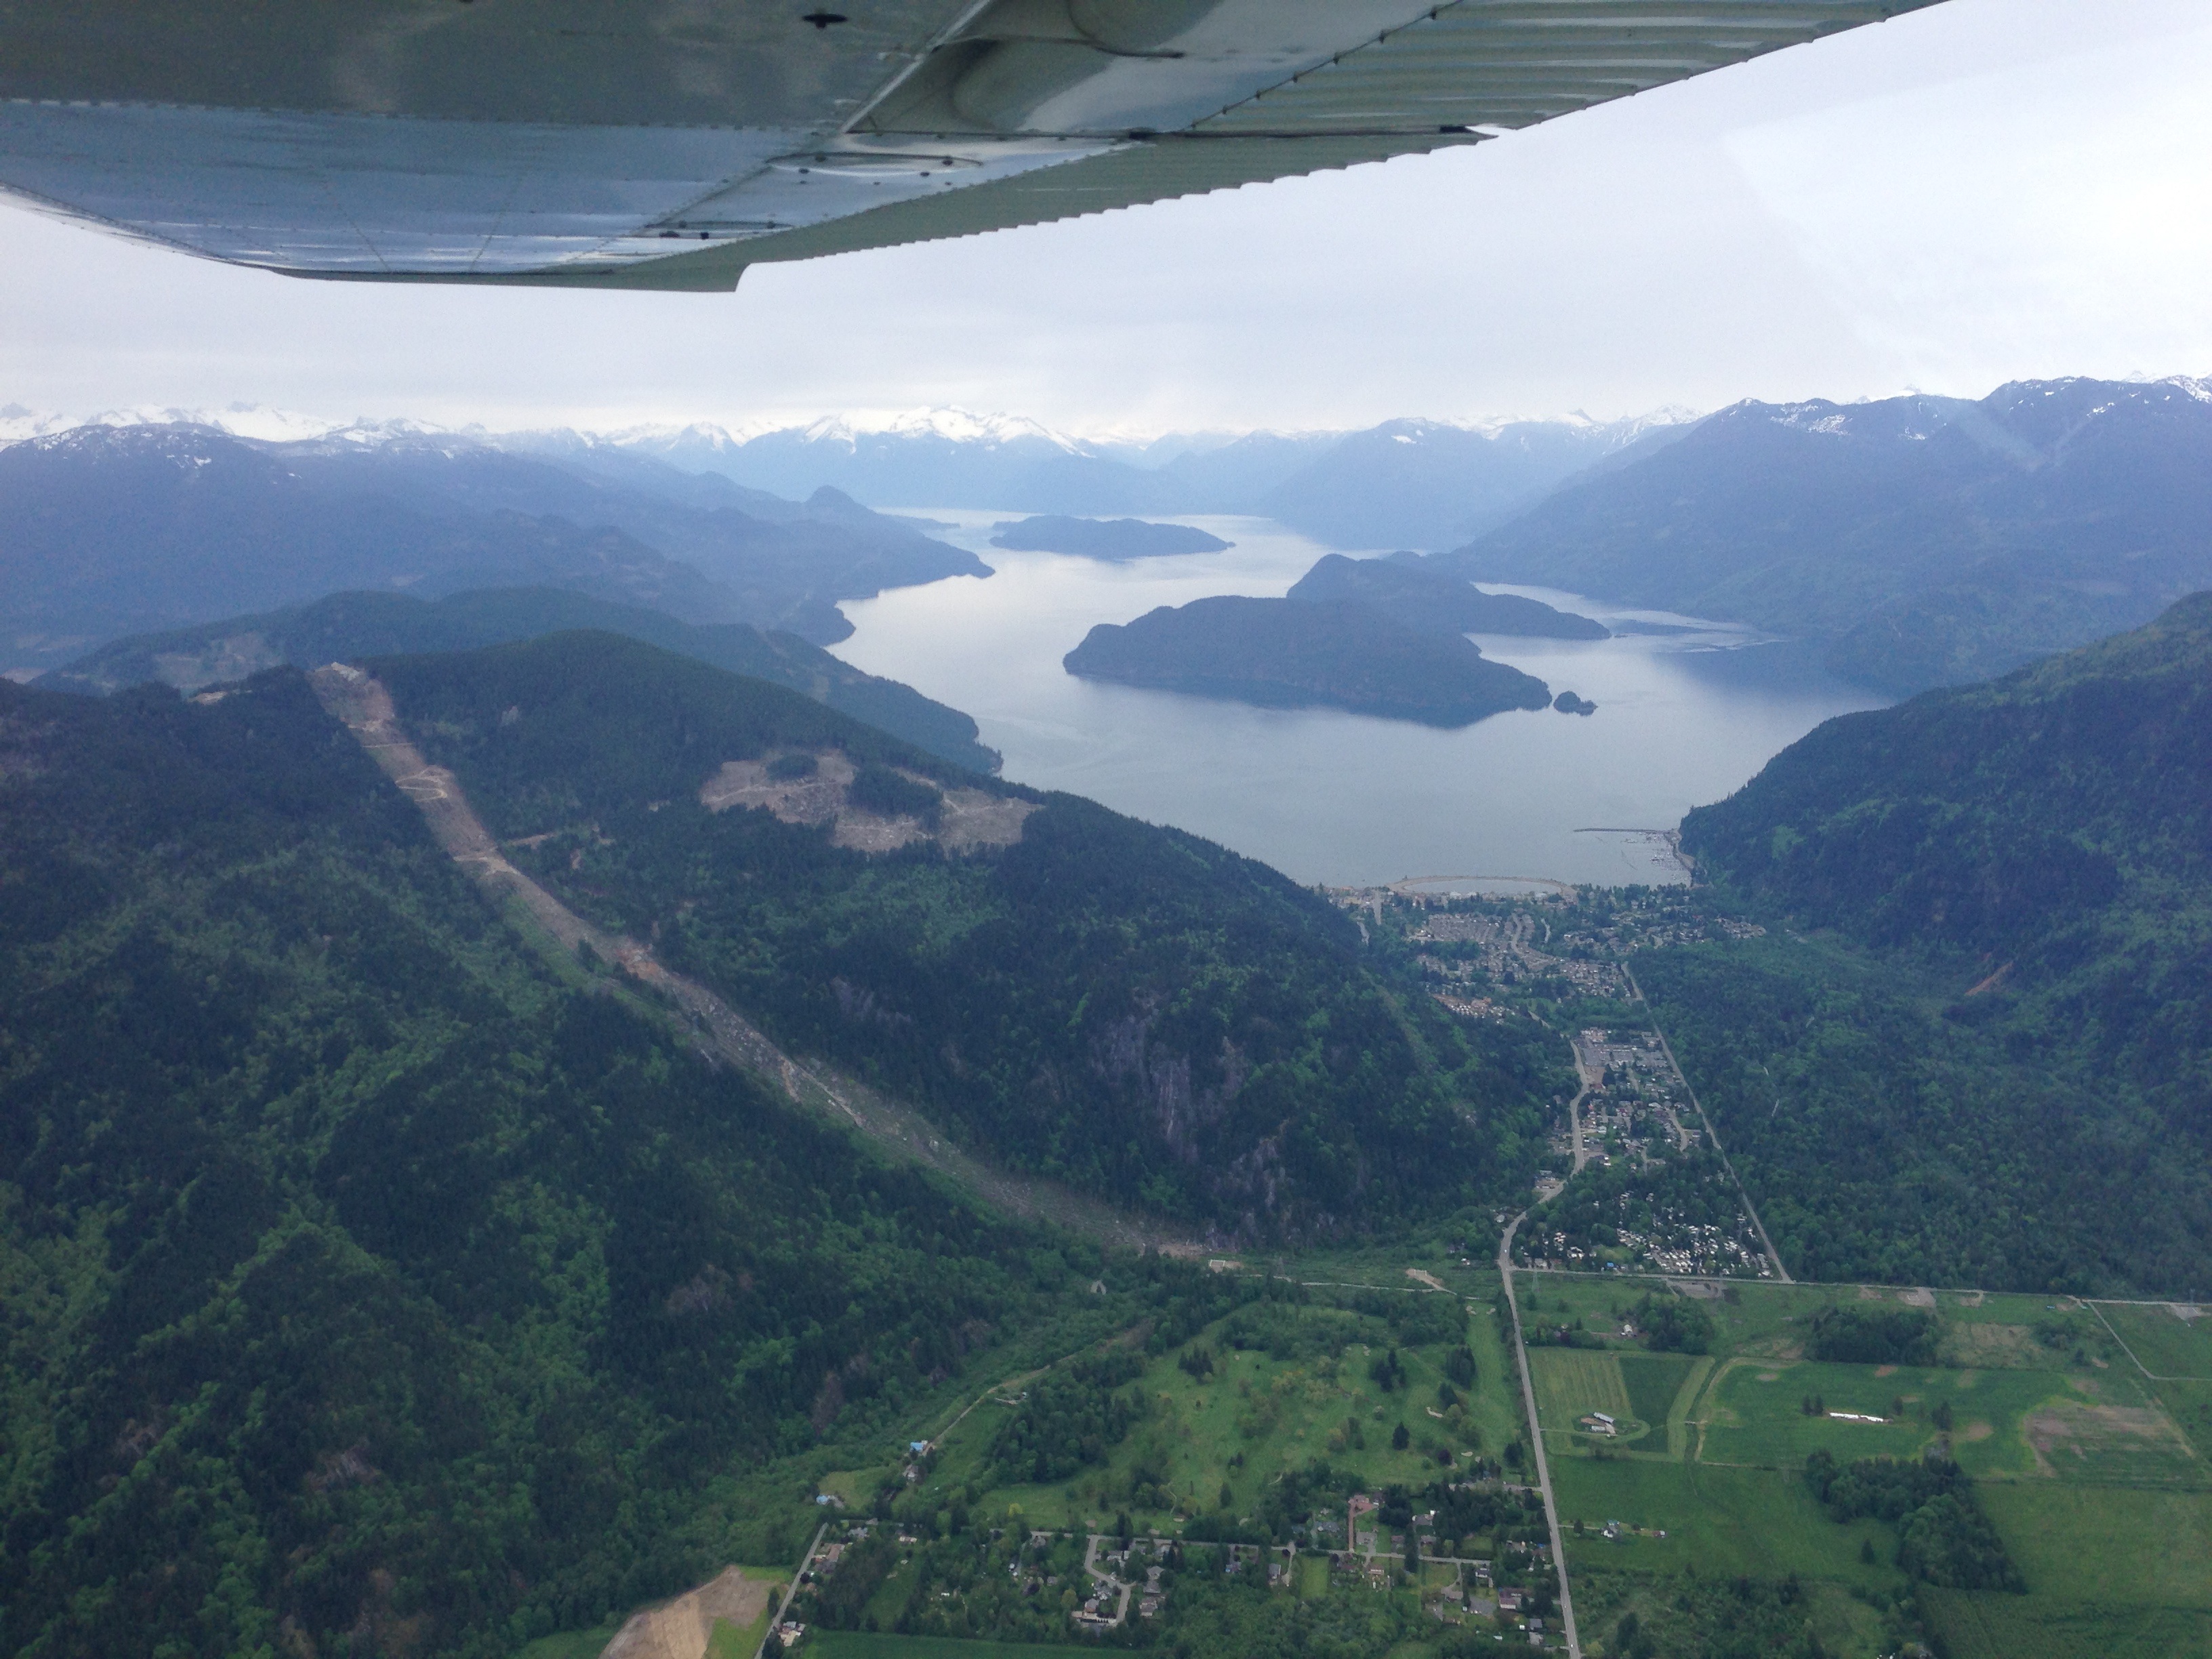 Another shot looking over Harrison Hot Springs, this time without a wing strut in the way